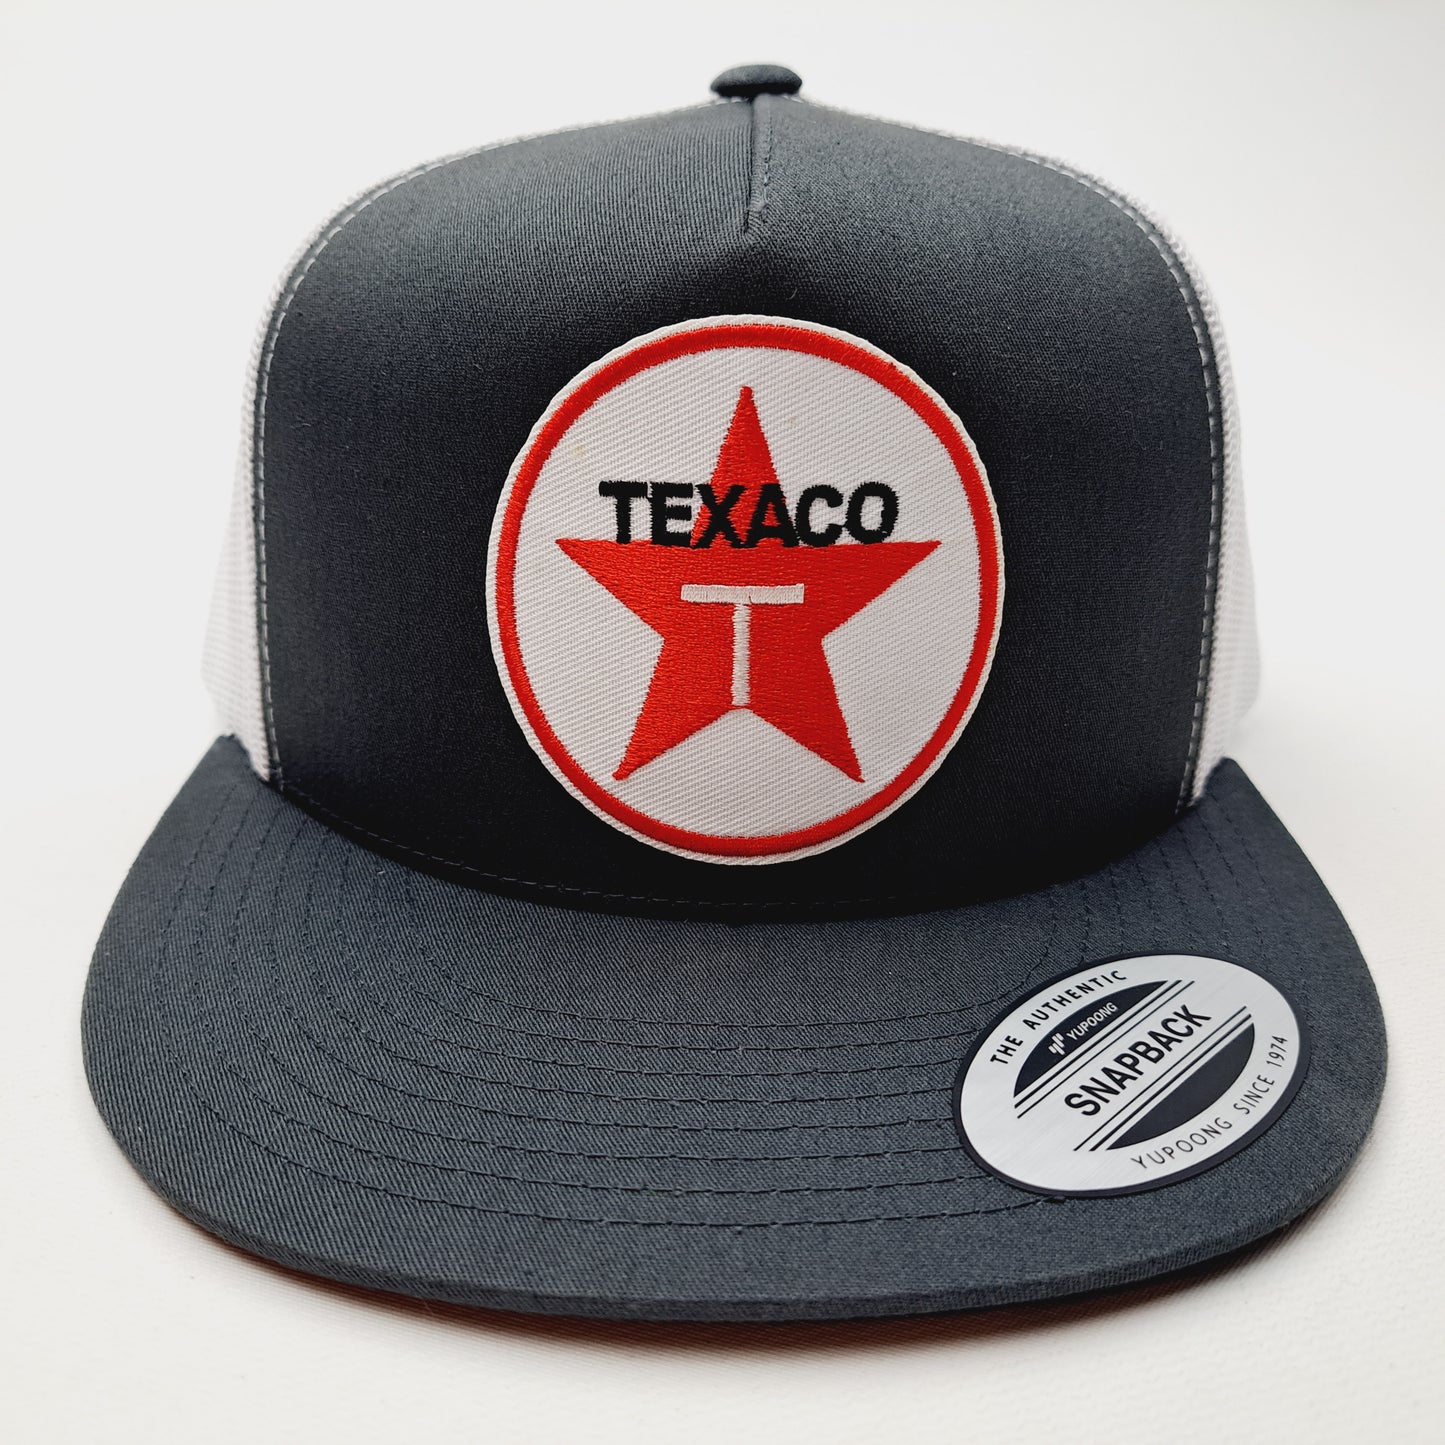 Texaco Embroidered Patch Flat Bill Snapback Mesh Hat Cap Yupoong Gray White